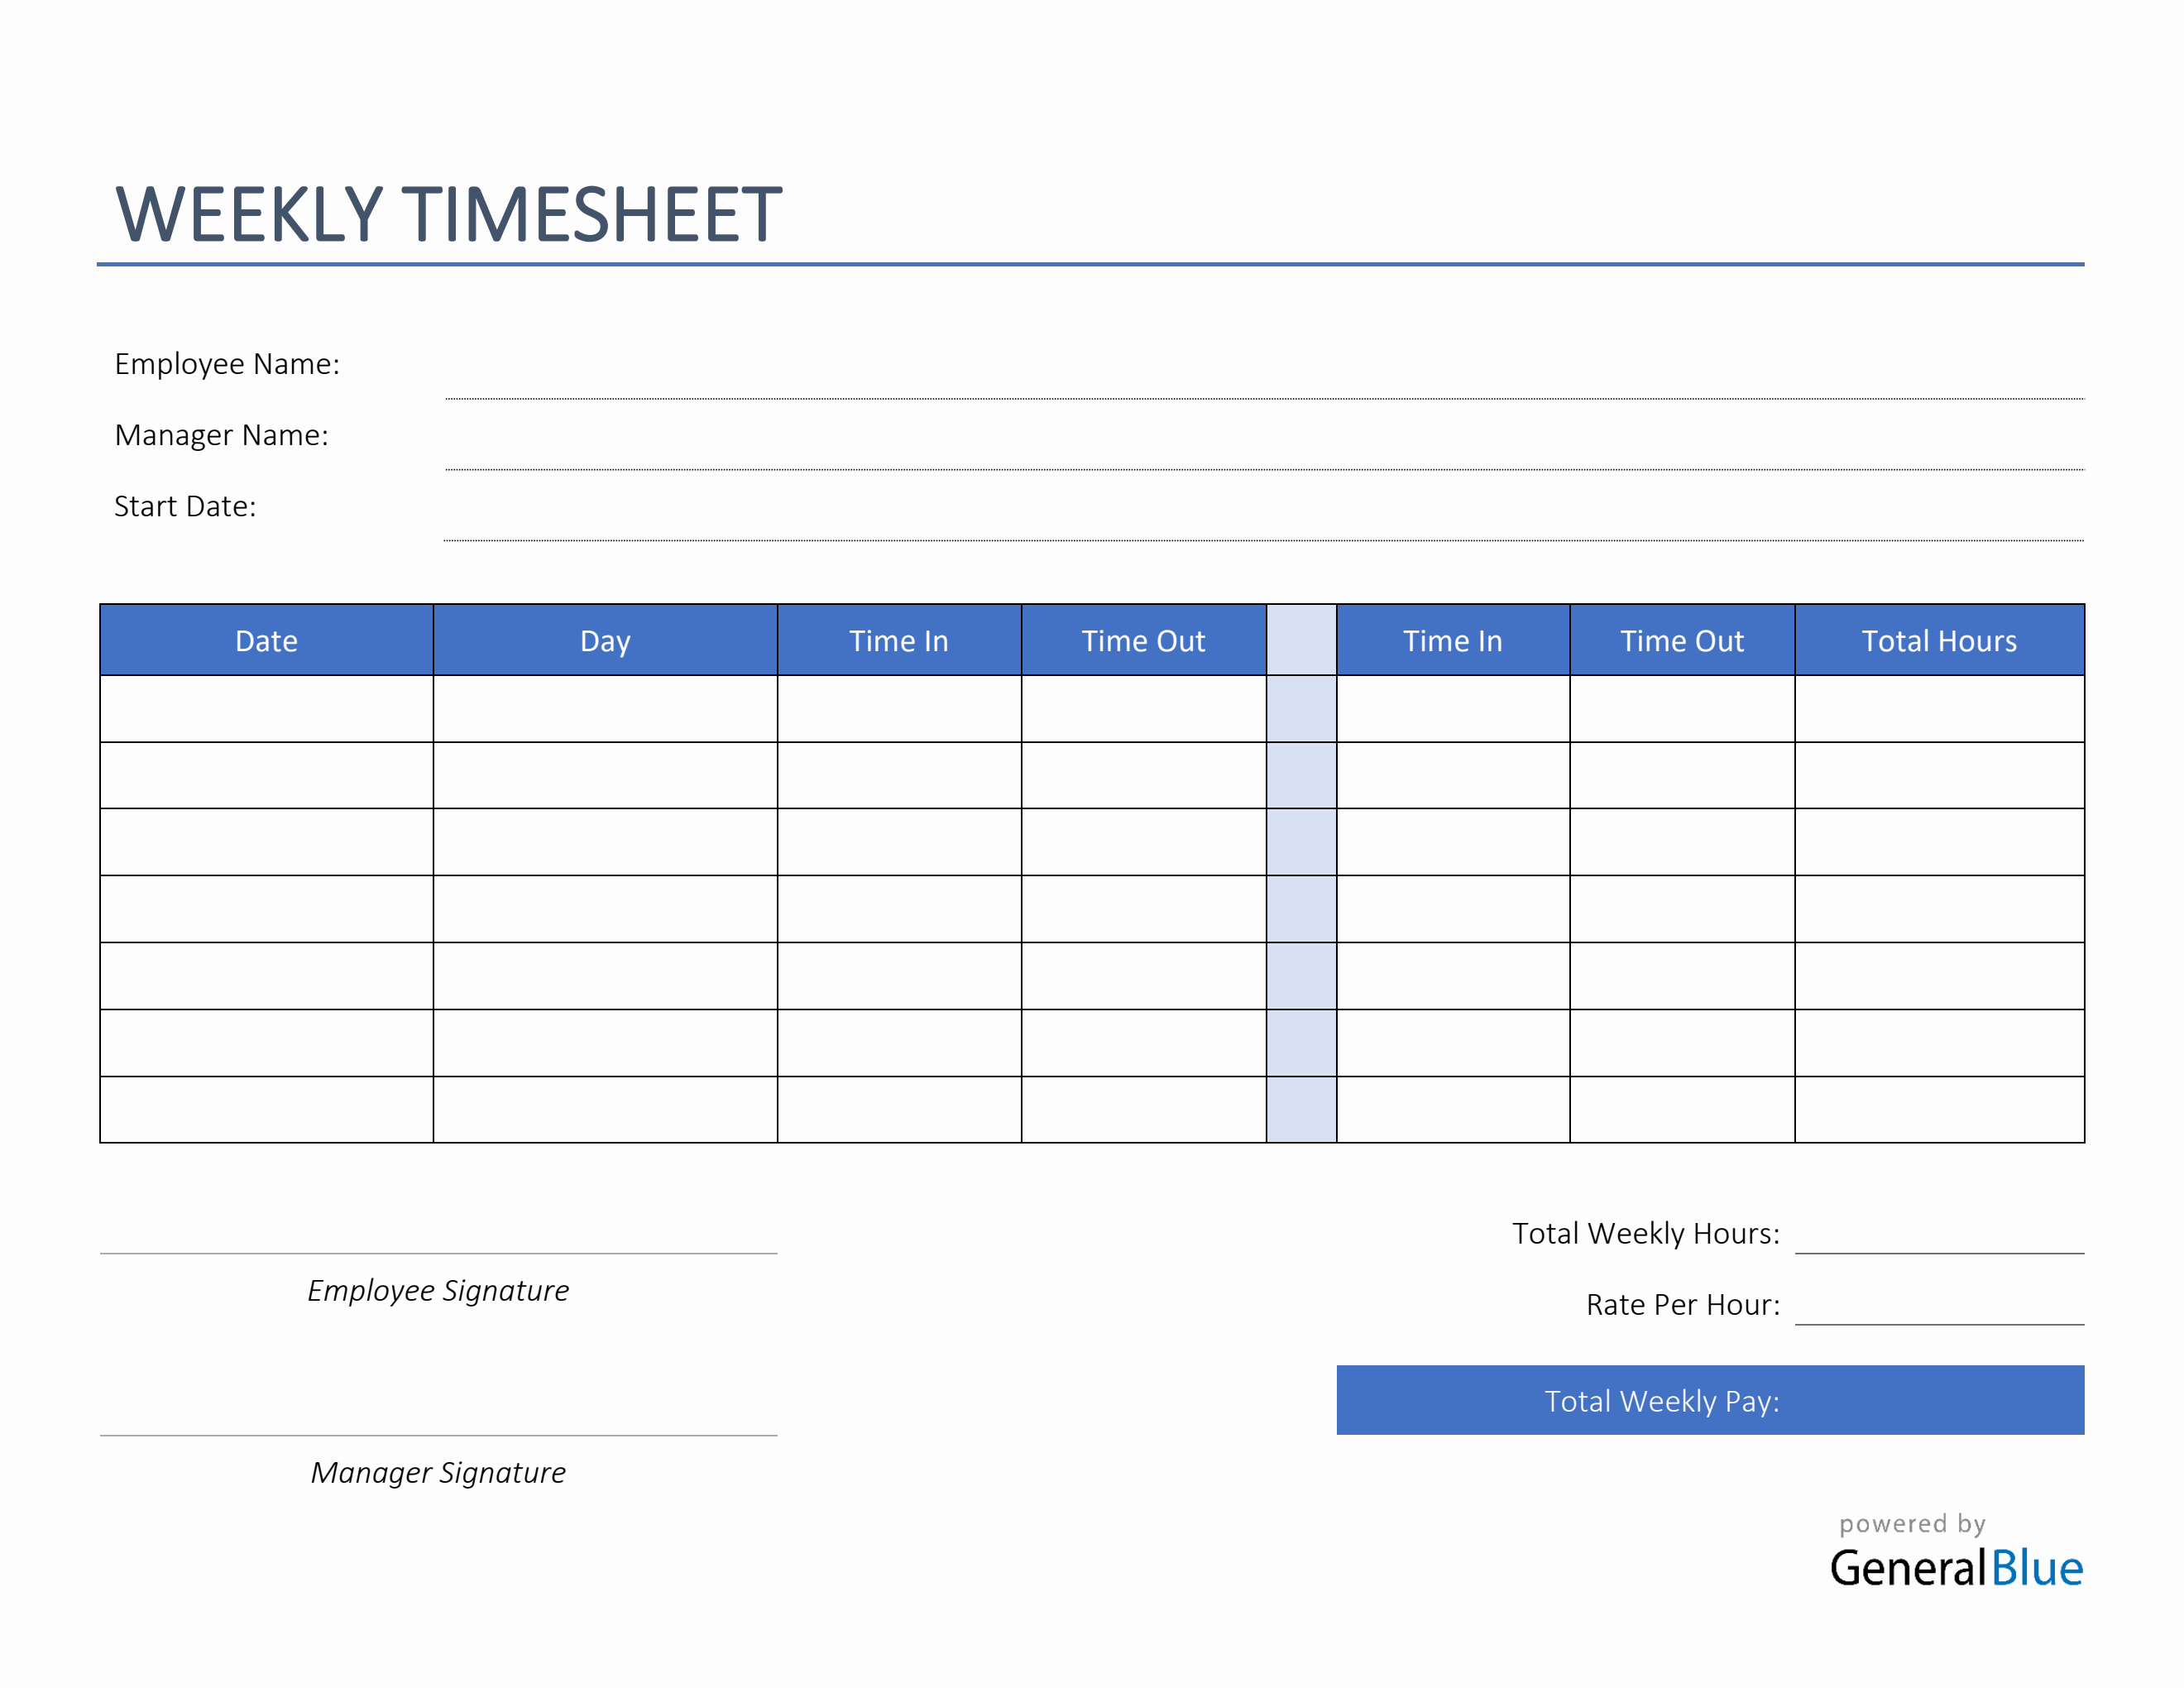 employee-time-sheets-printable-printable-form-templates-and-letter